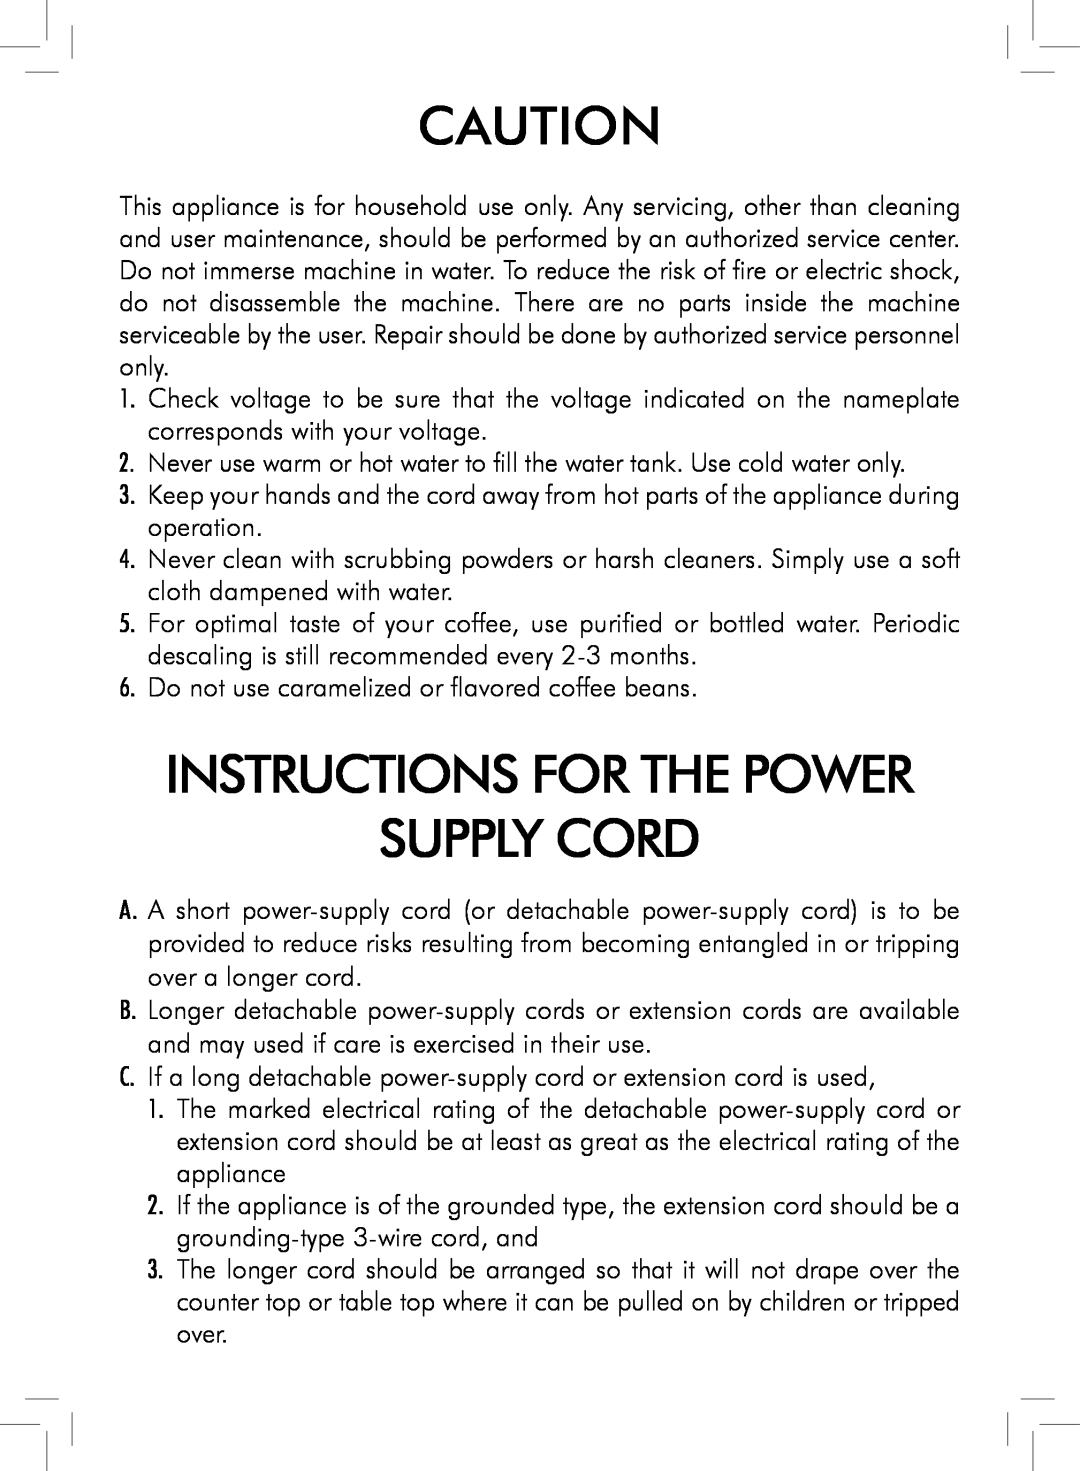 Saeco Coffee Makers HD8772 user manual Instructions For The Power Supply Cord 